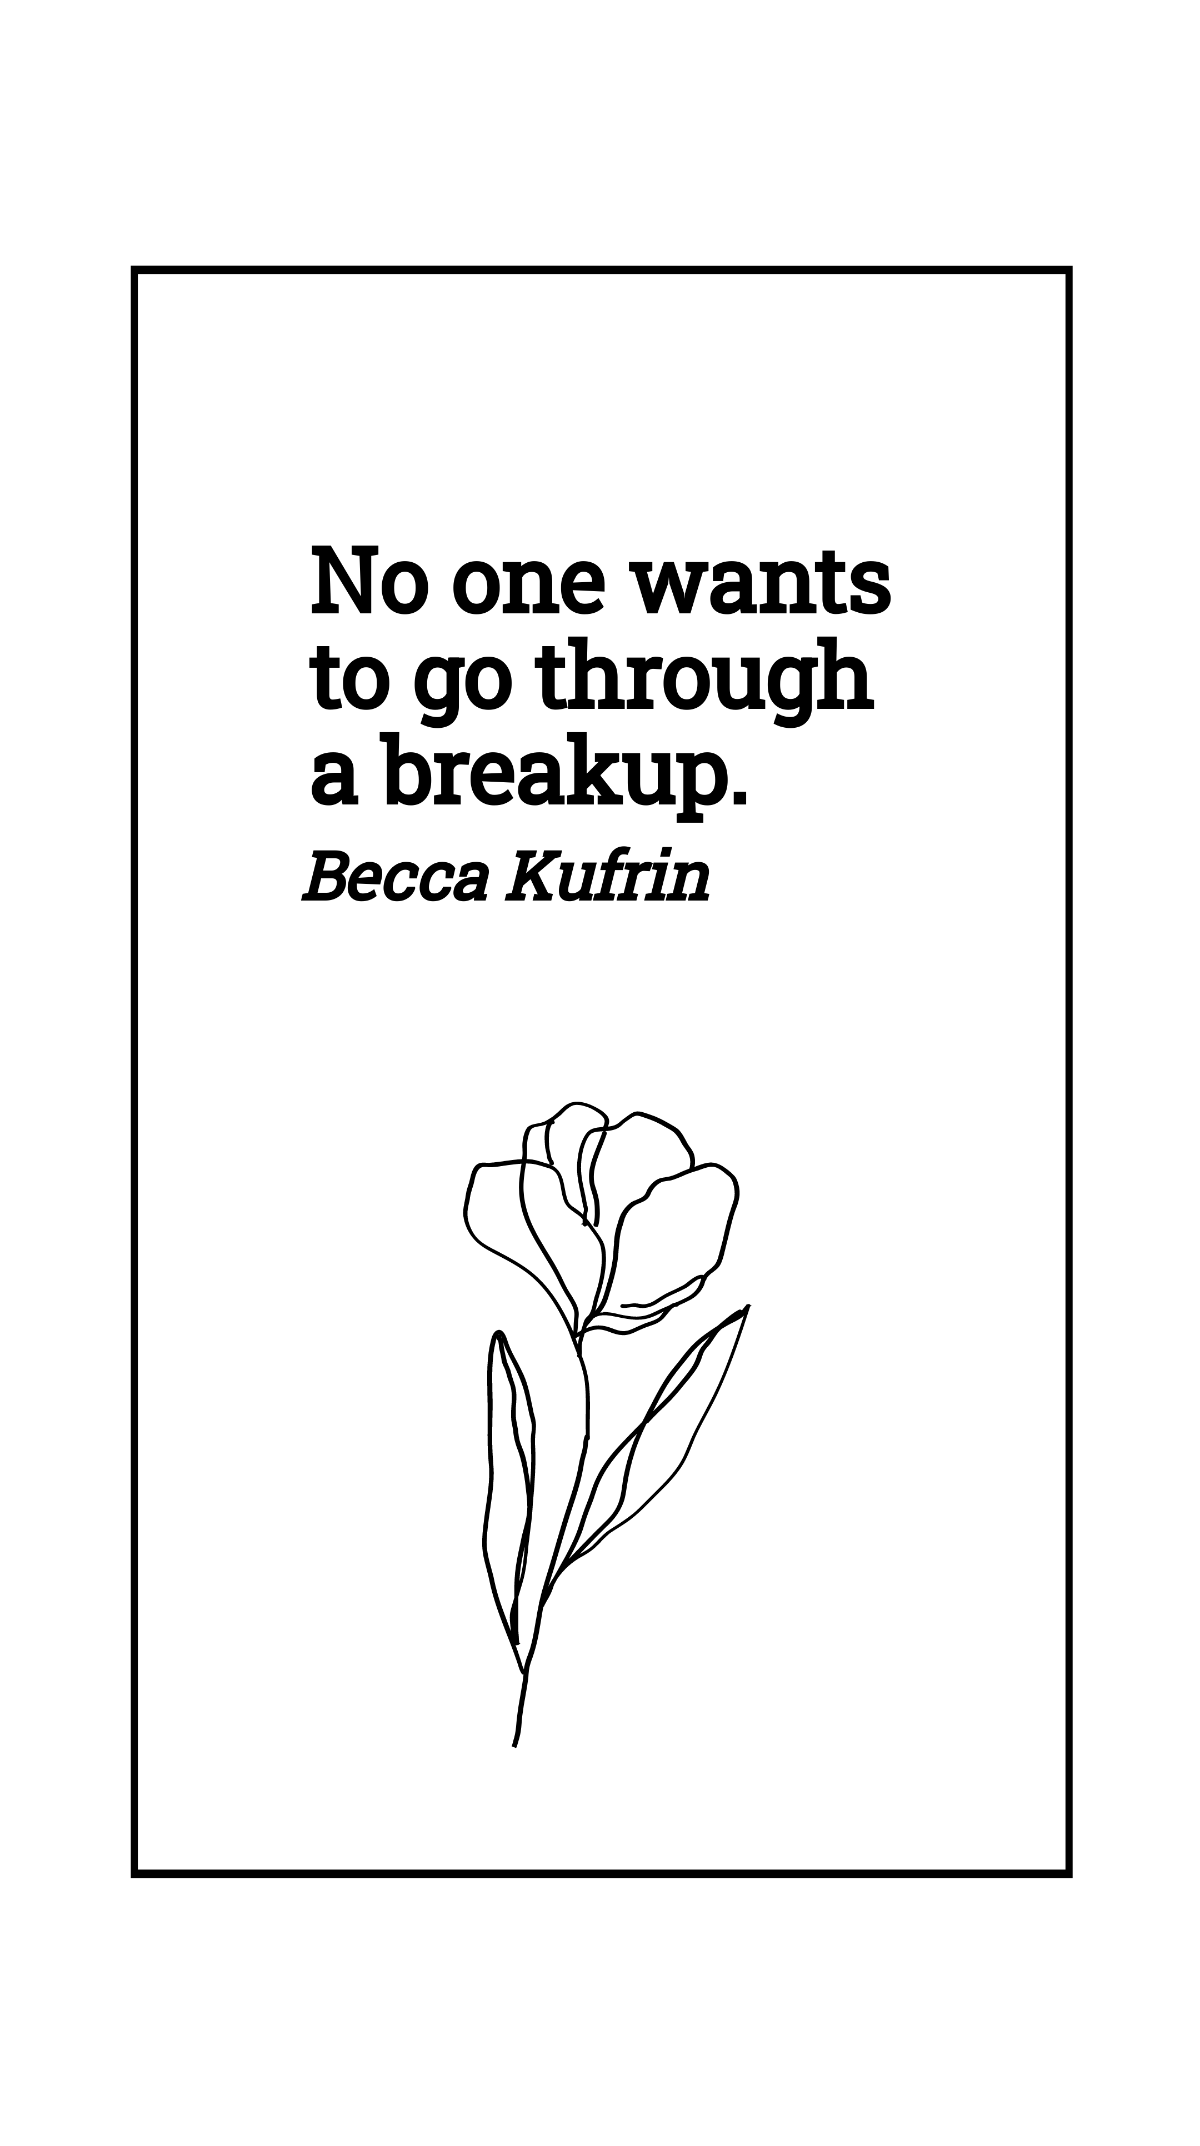 Free Becca Kufrin - No one wants to go through a breakup. Template